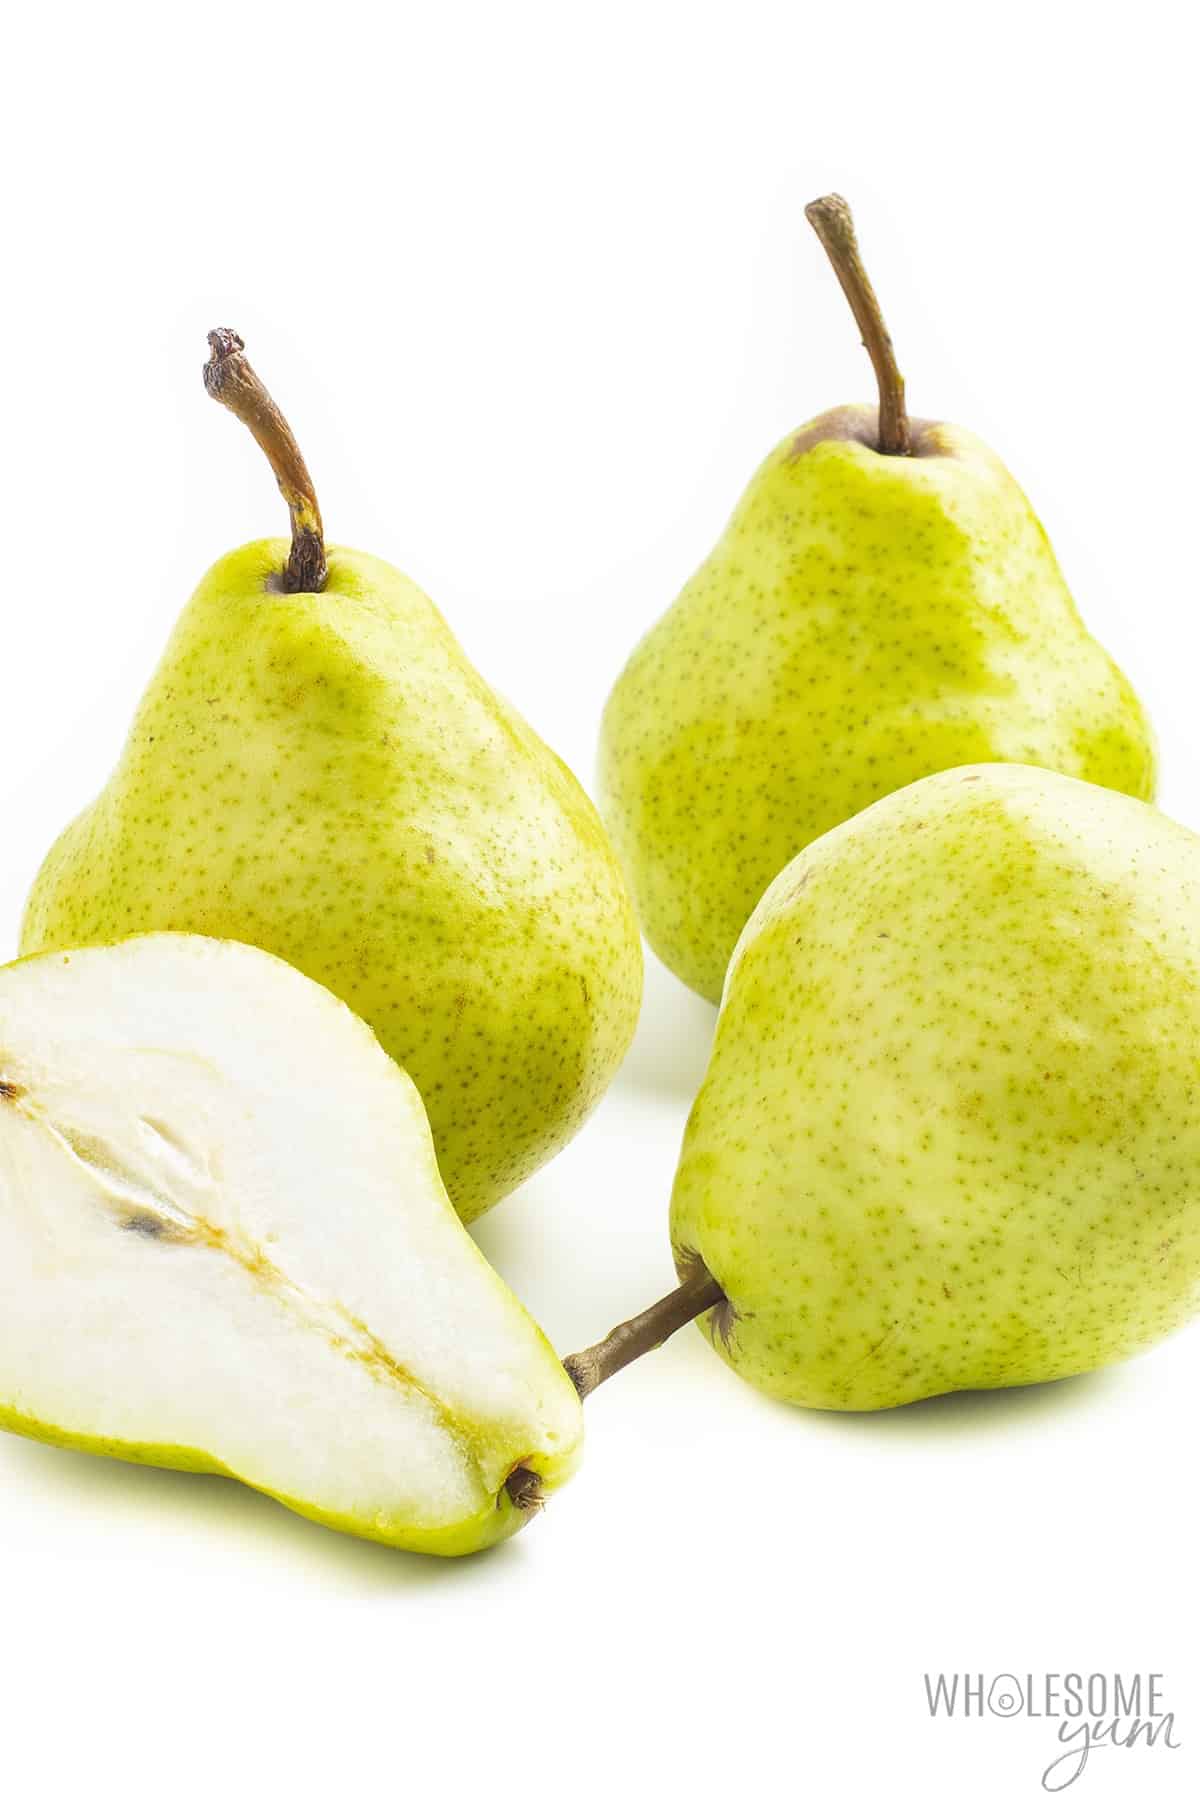 Are pears keto friendly? These whole, raw pears are not keto.